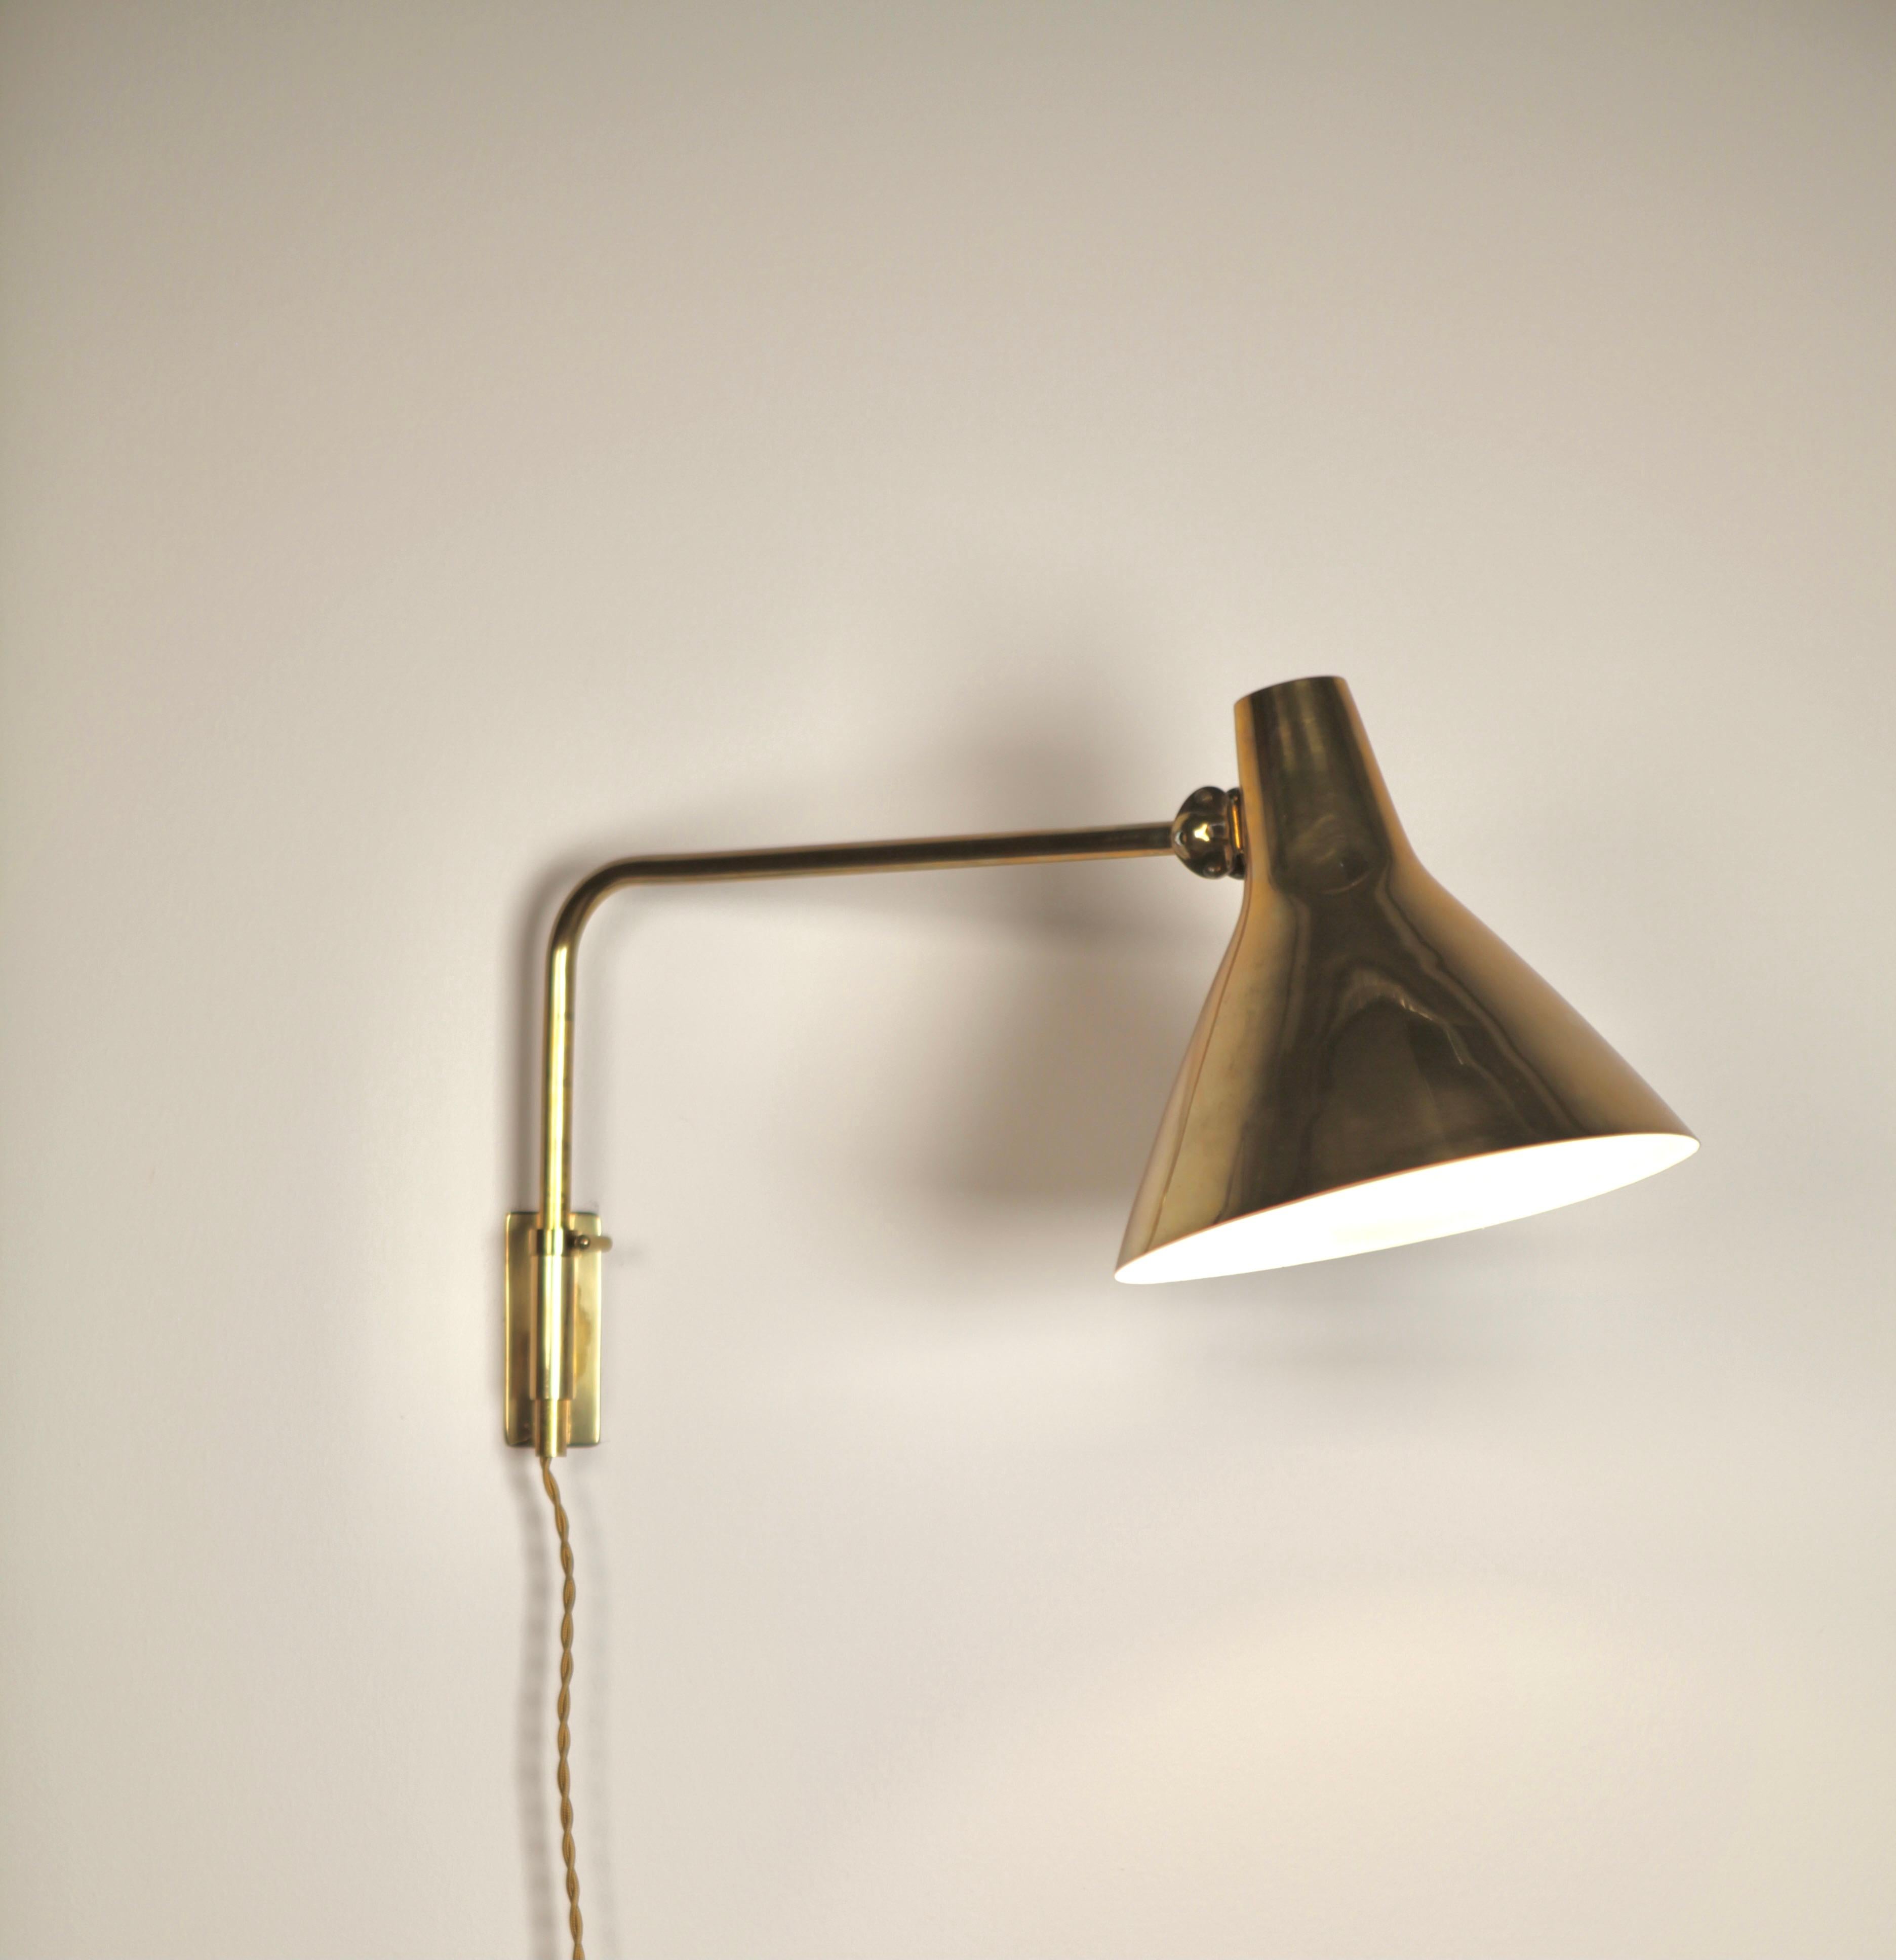 Rare adjustable wall light by Paavo Tynell, model 7174.
Manufactured by Taito in Finland, 1950s.
Brass, new rewired.
Great vintage condition.